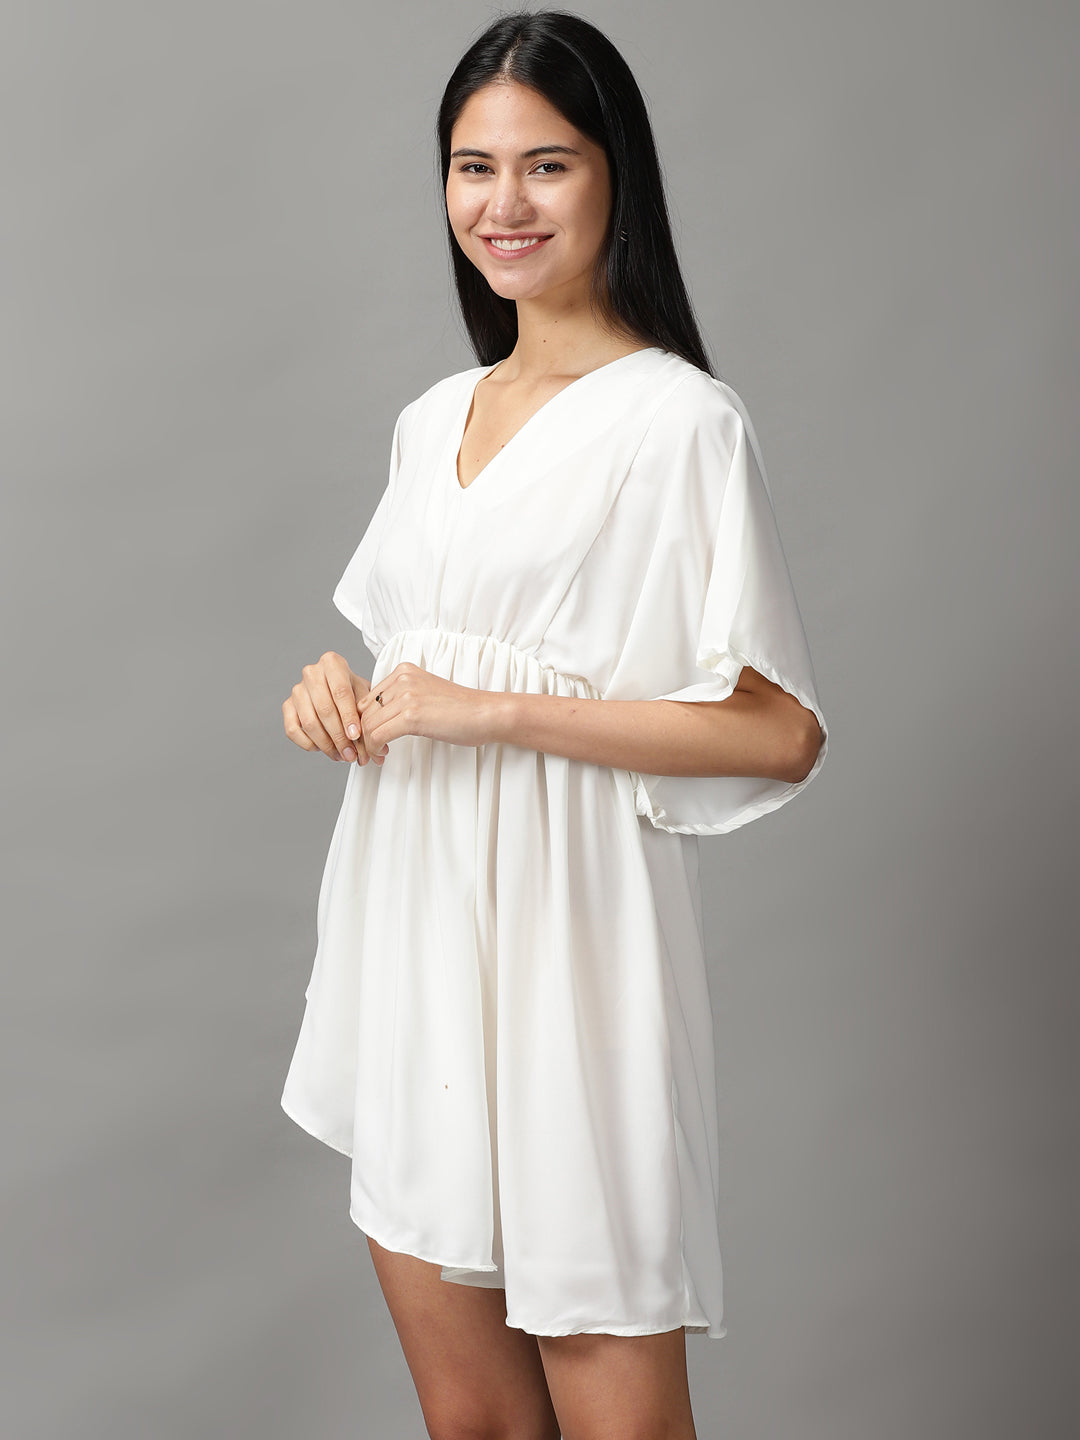 Women's Off White Solid Fit and Flare Dress